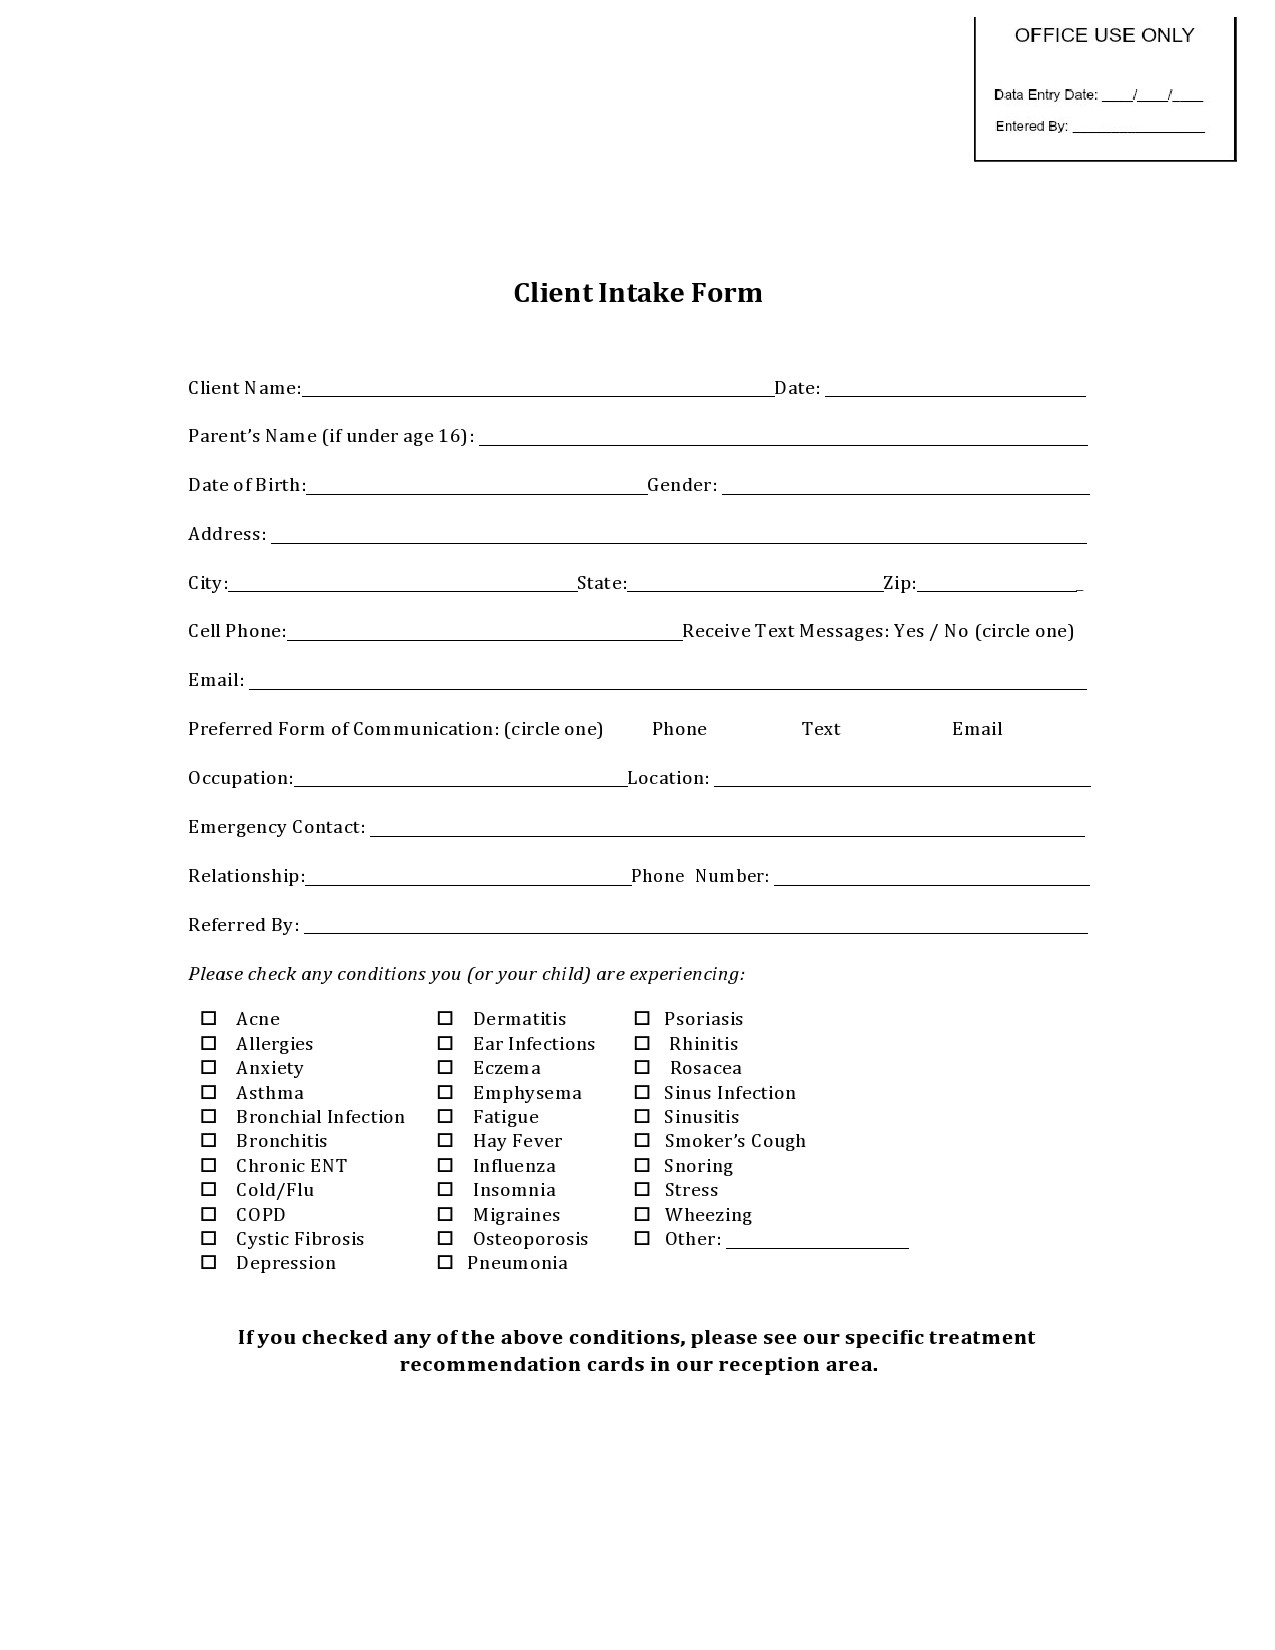 Free client intake form 18